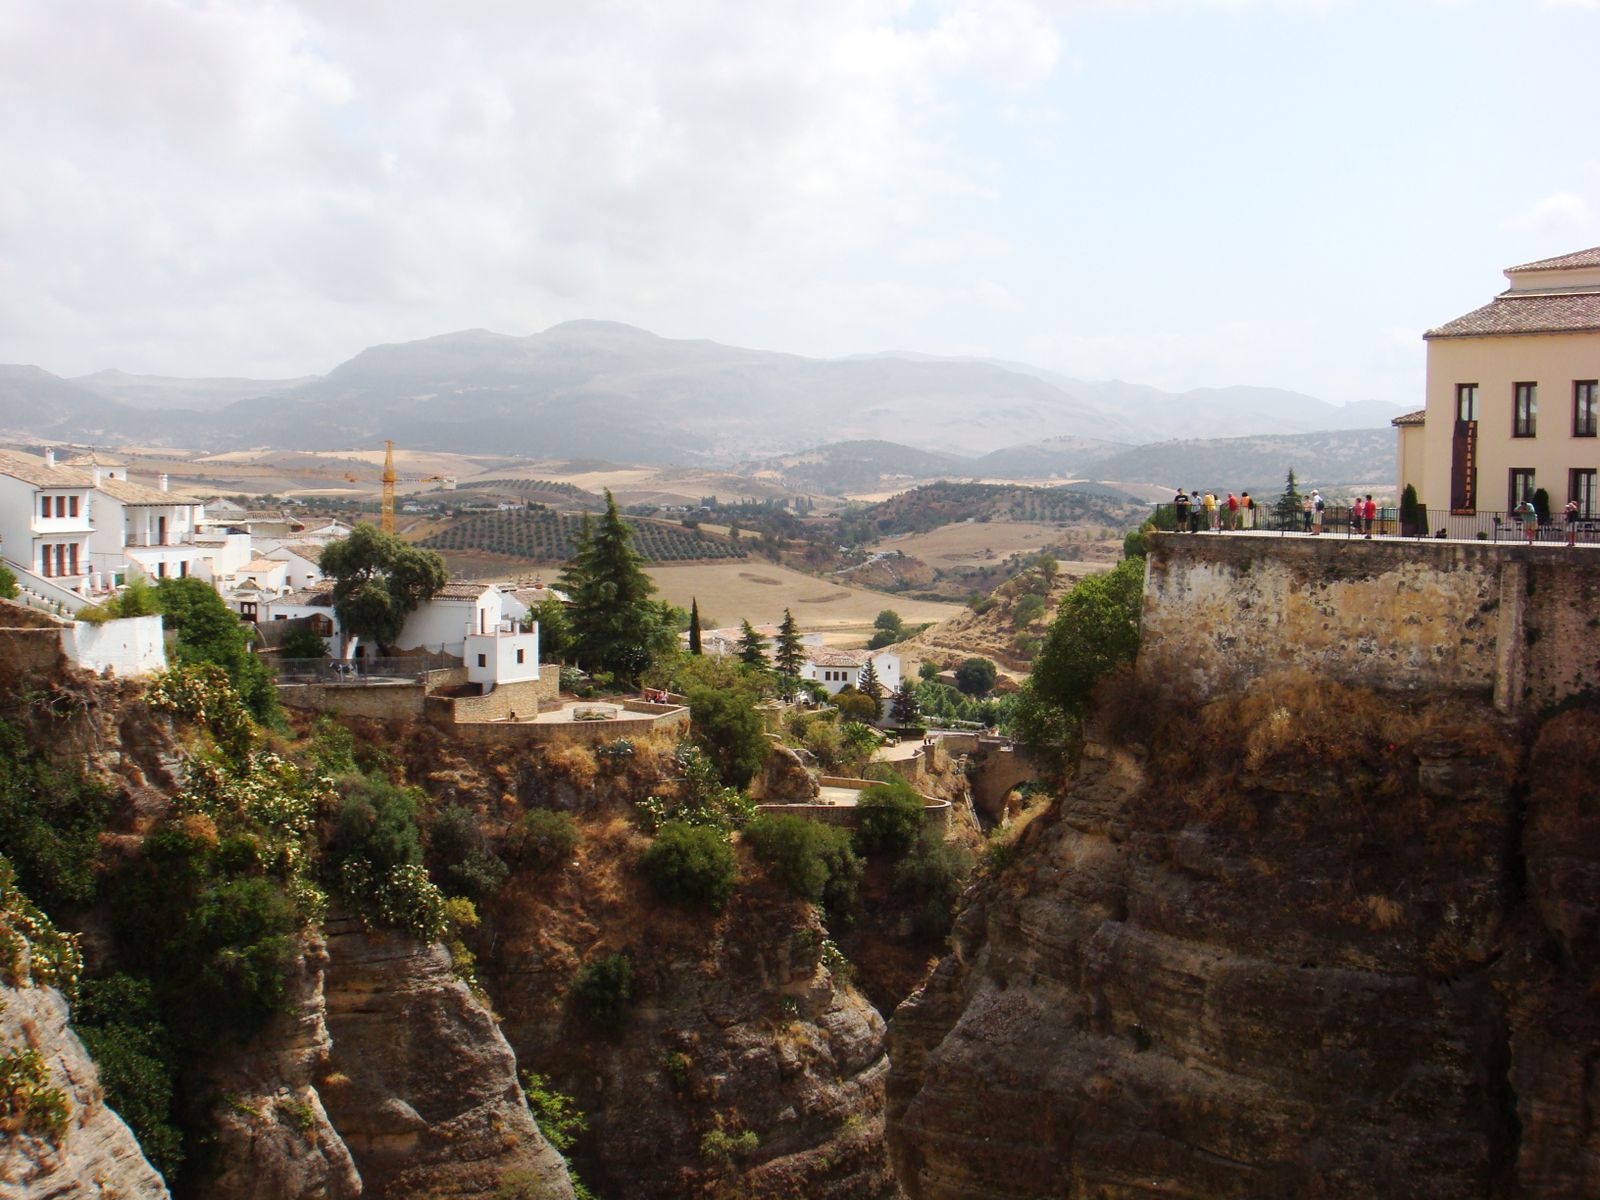 Typical landscape of Andalusia